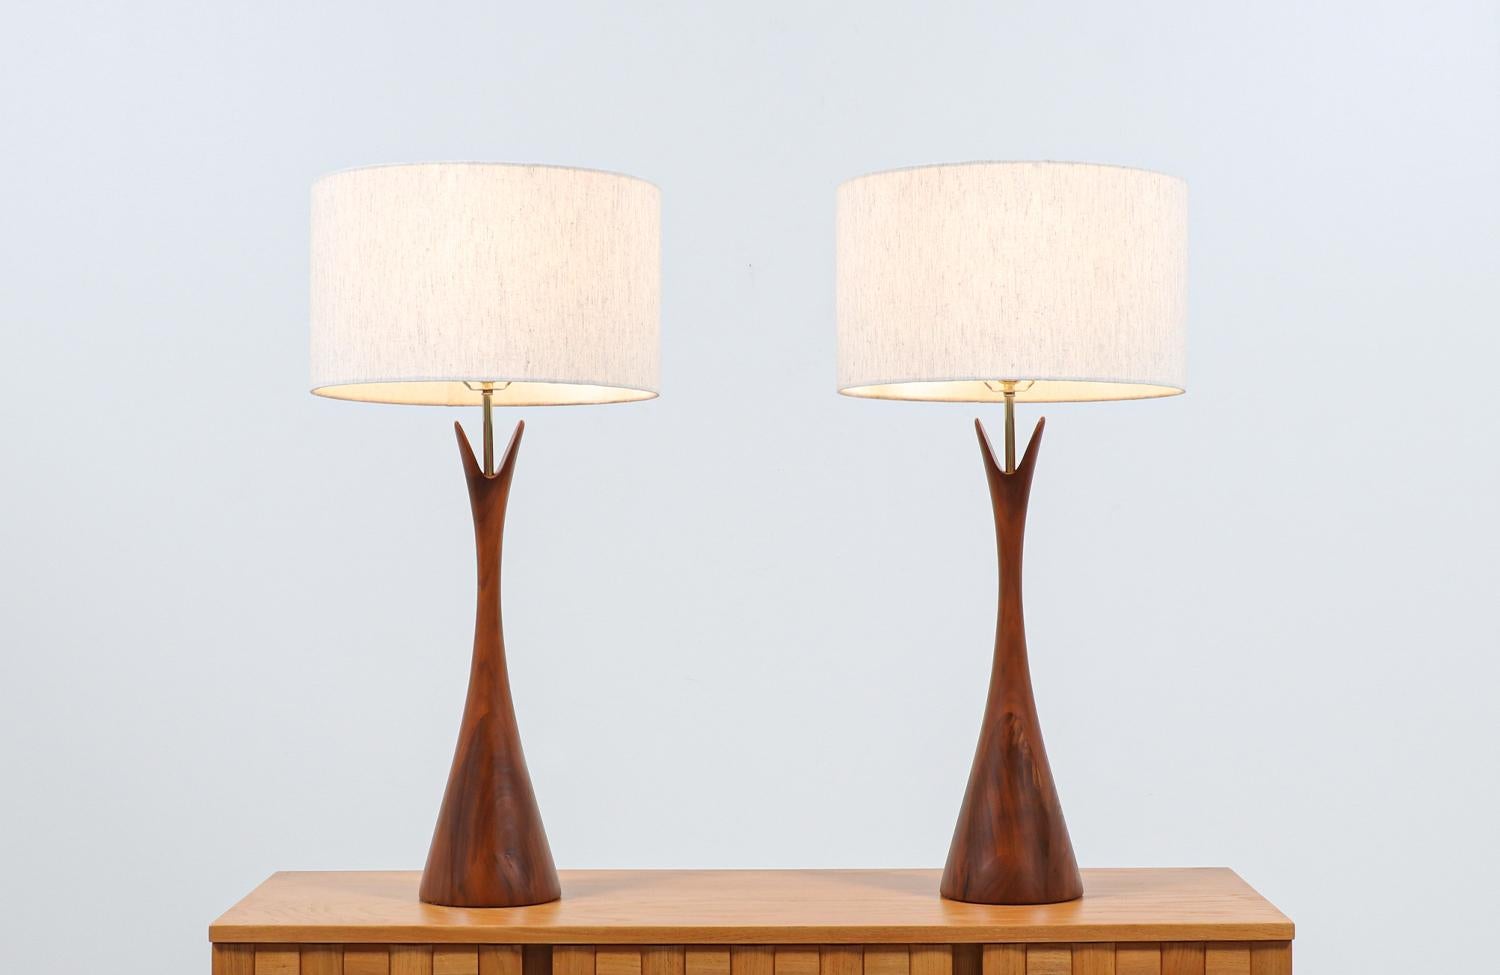 Mid-Century Modern walnut table lamps manufactured by Modernera Lamp Co. in the United States in the 1950’s. The sculpted walnut bodies resemble the shape of an hourglass with two prongs on top creating a mixture of artistic shape and is